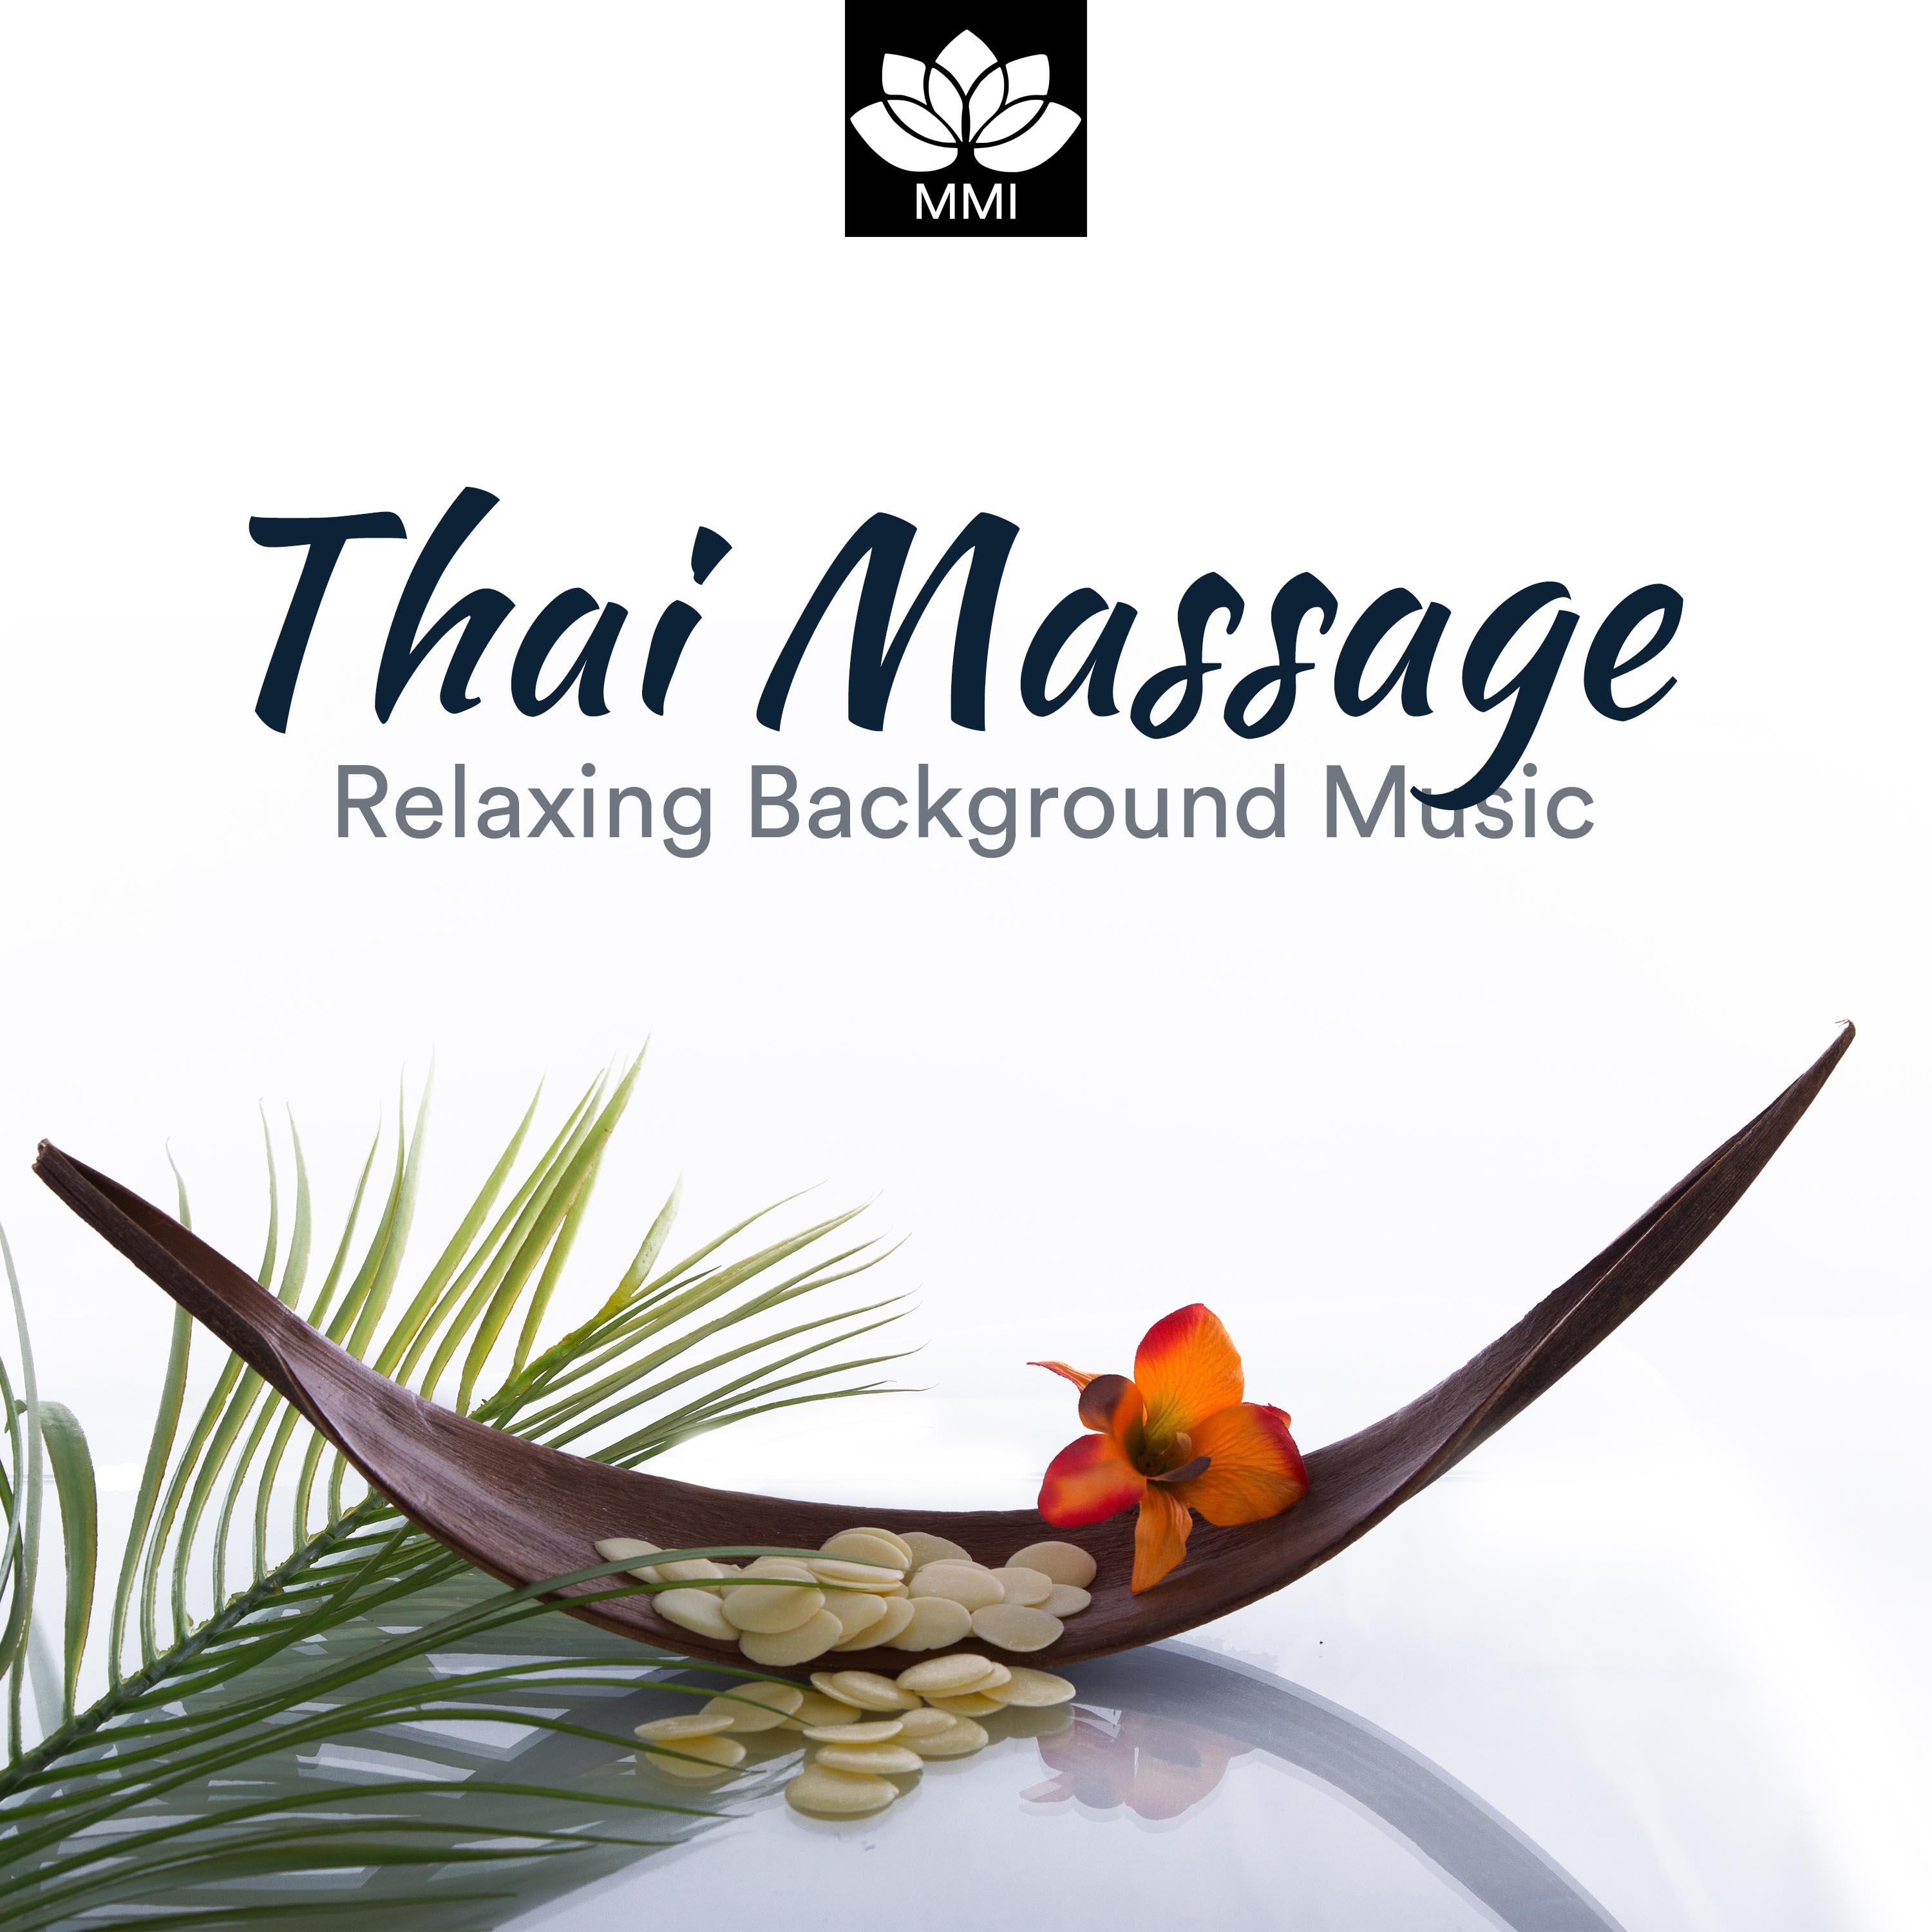 Thai Massage - Relaxing Background Music for Wellness Centers, Spa, Hot Massage, Erotic Massage, Nature Sounds